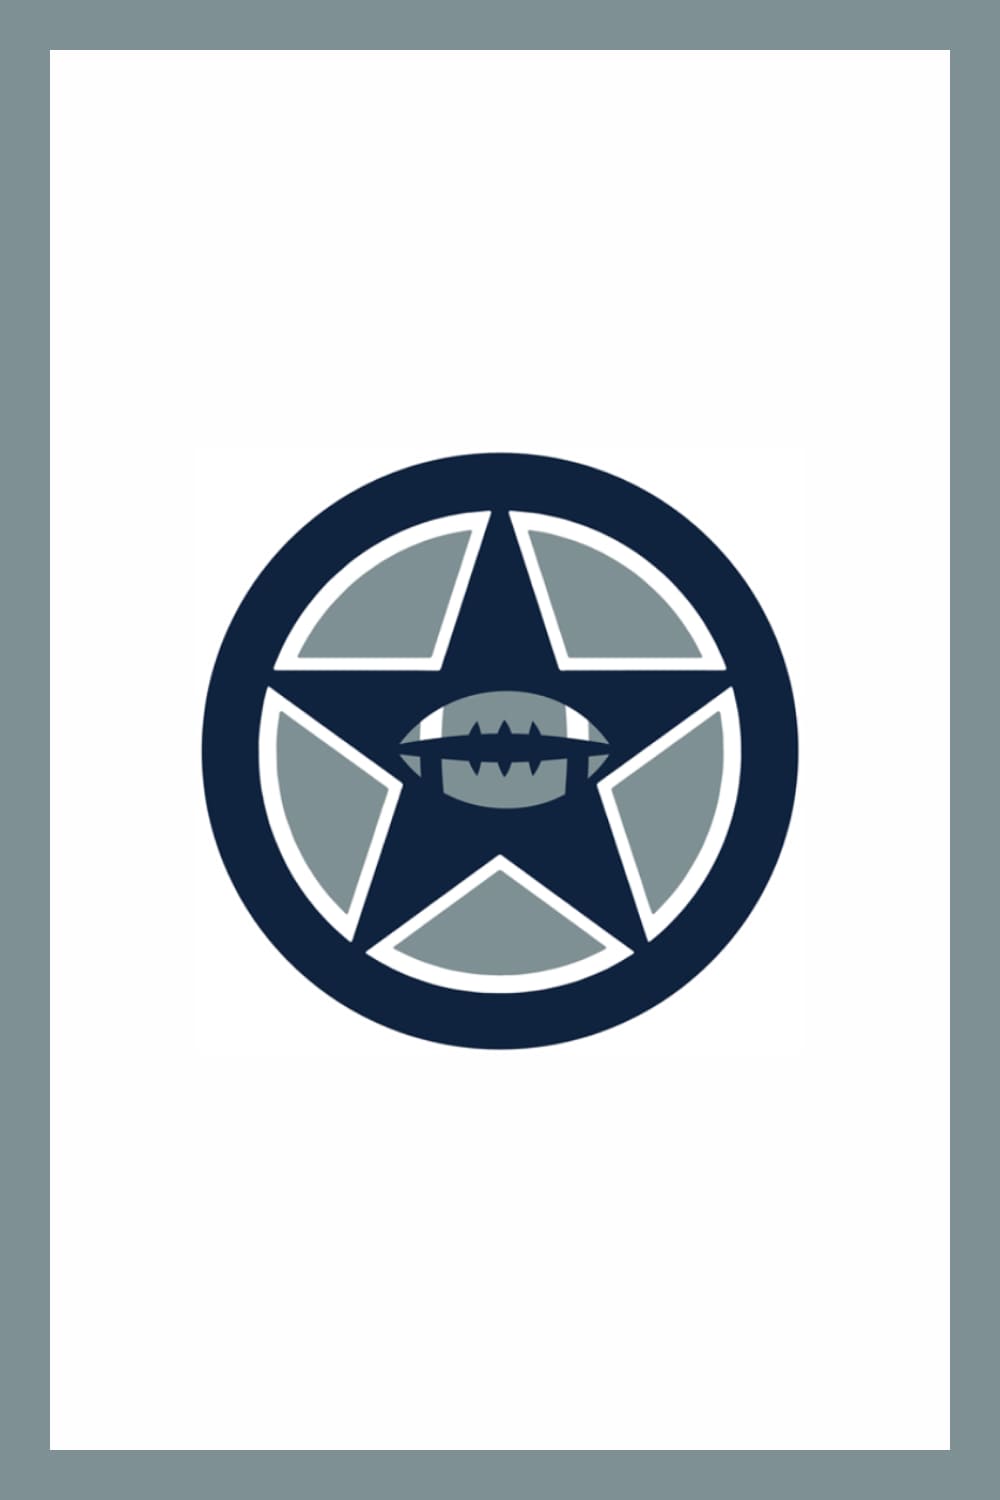 Blue star with football ball and circle around.